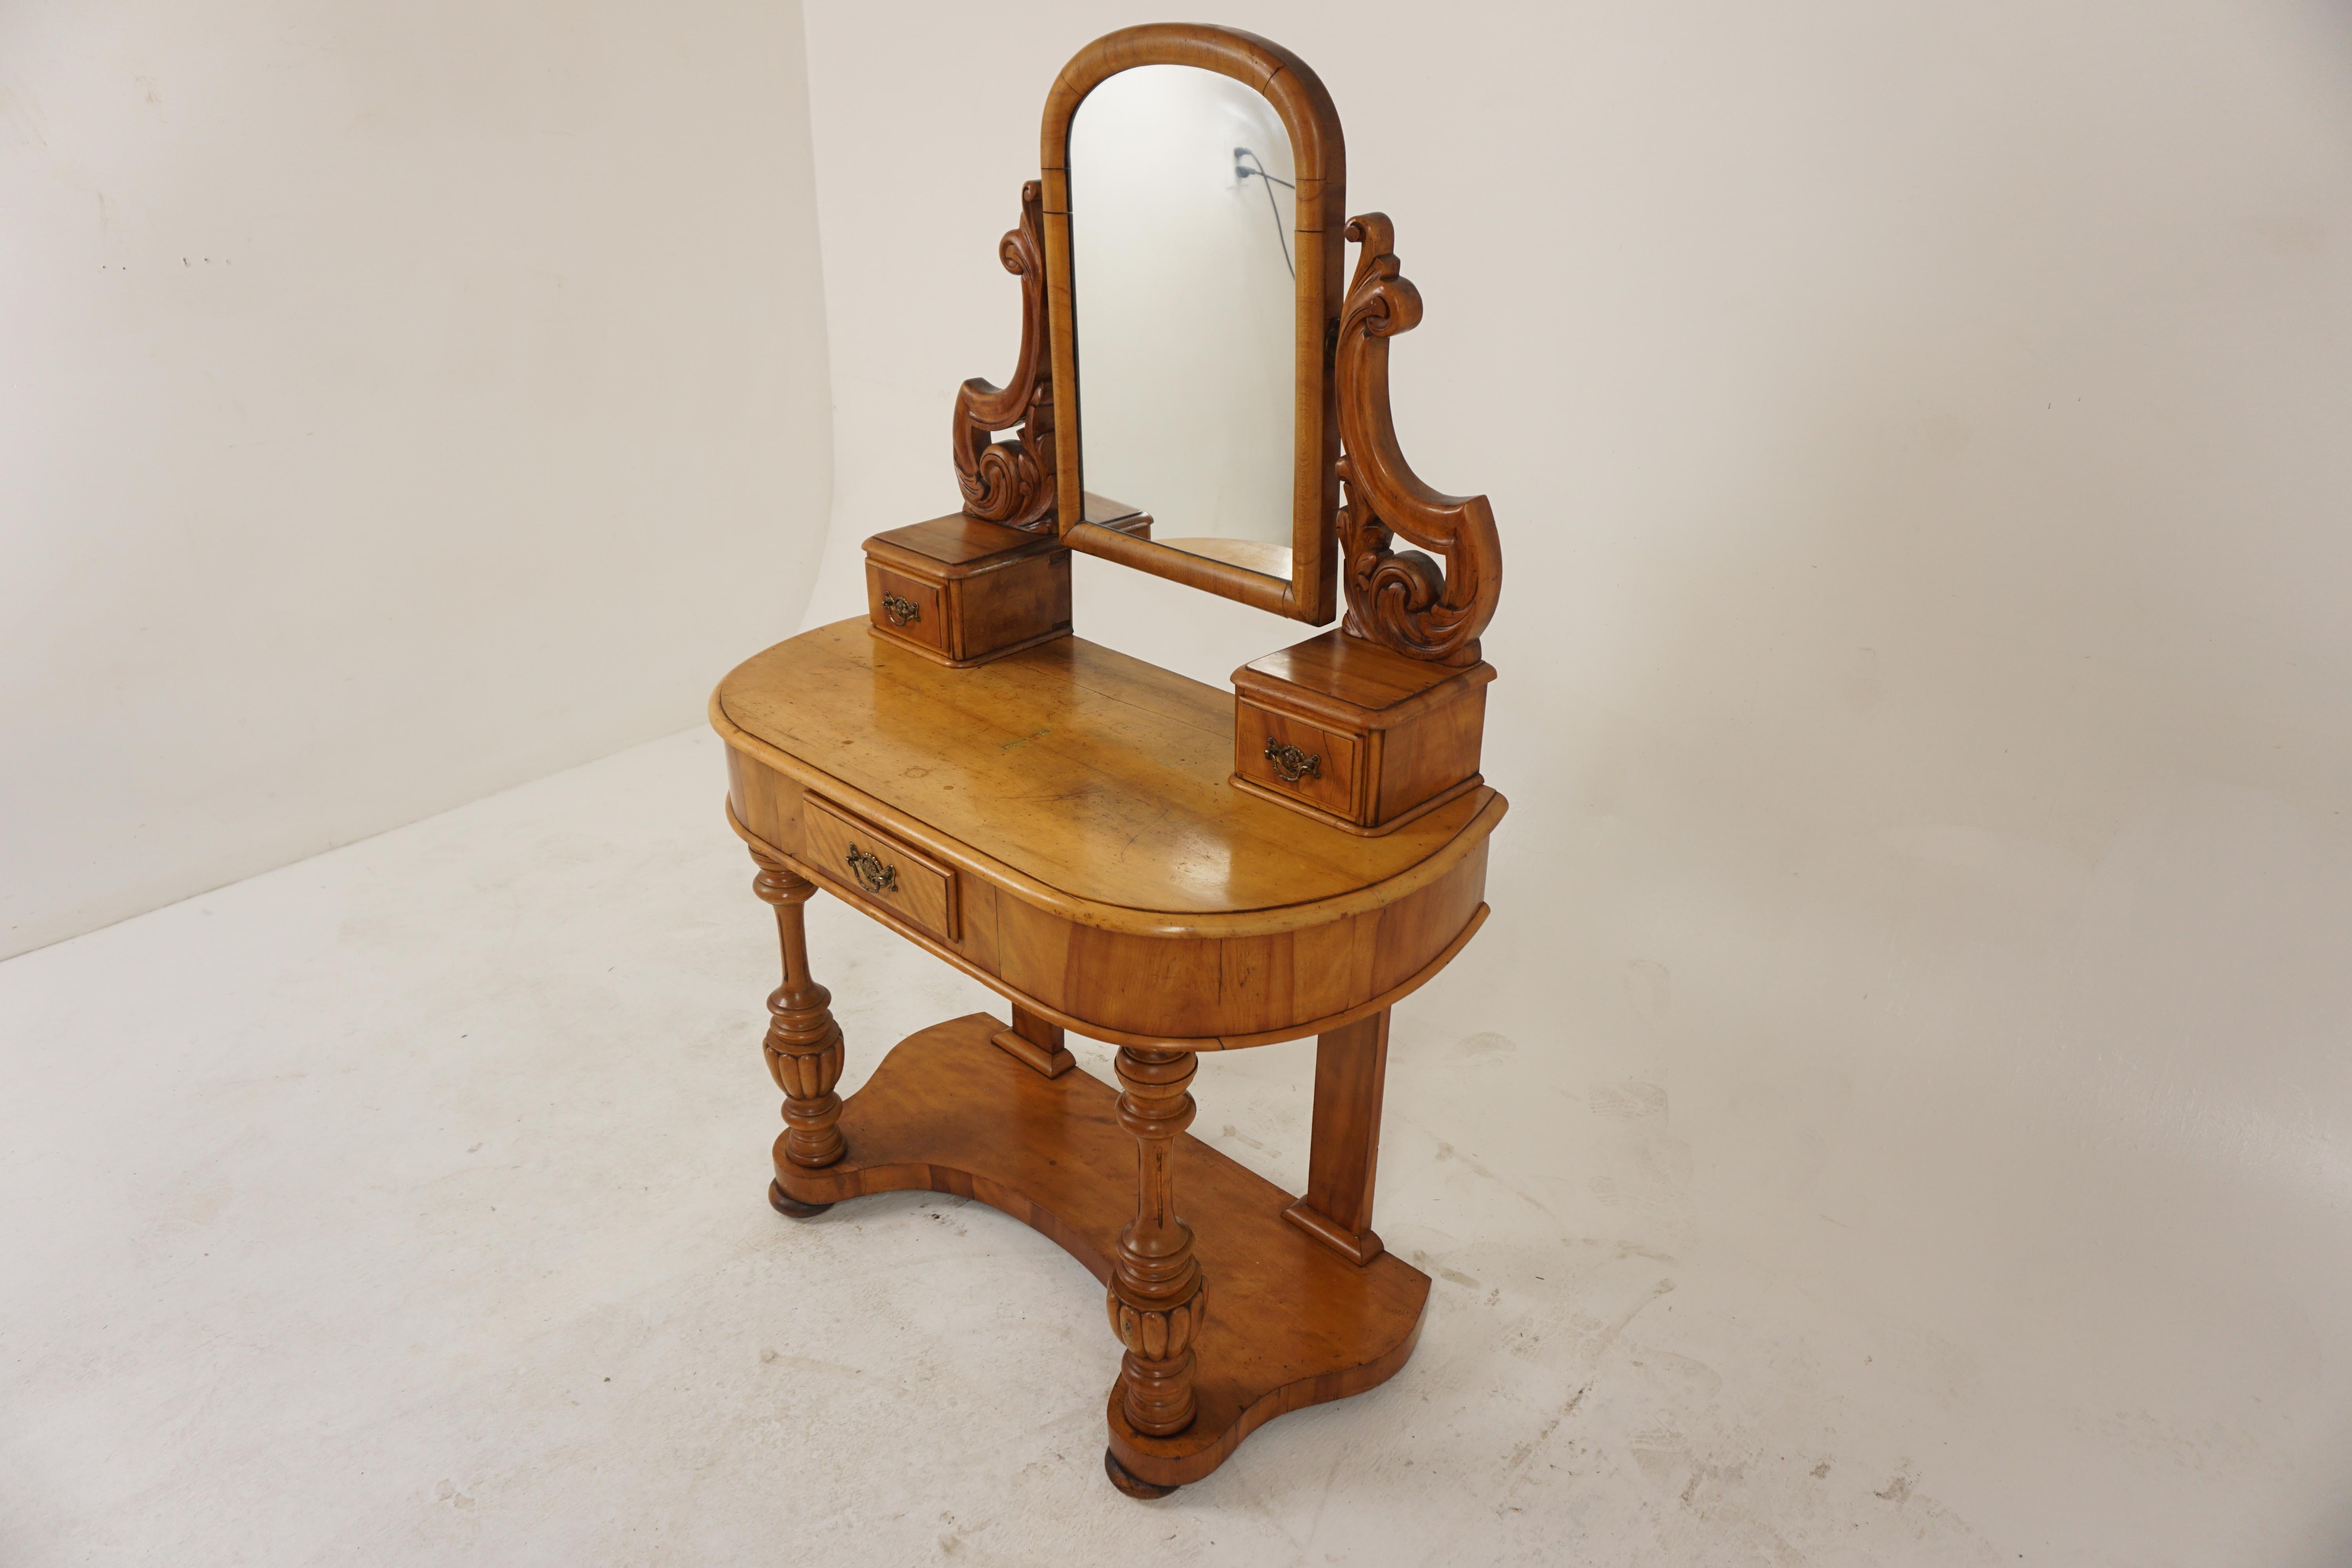 Victorian Satin Walnut Duchess Dressing Table, Vanity, Scotland 1870, H1161

Solid Walnut and veneer
Original finish
With framed original mirror
Carved mirror supports with adjustable mirror angle
Pair of small jewellery dovetailed drawers
Sitting